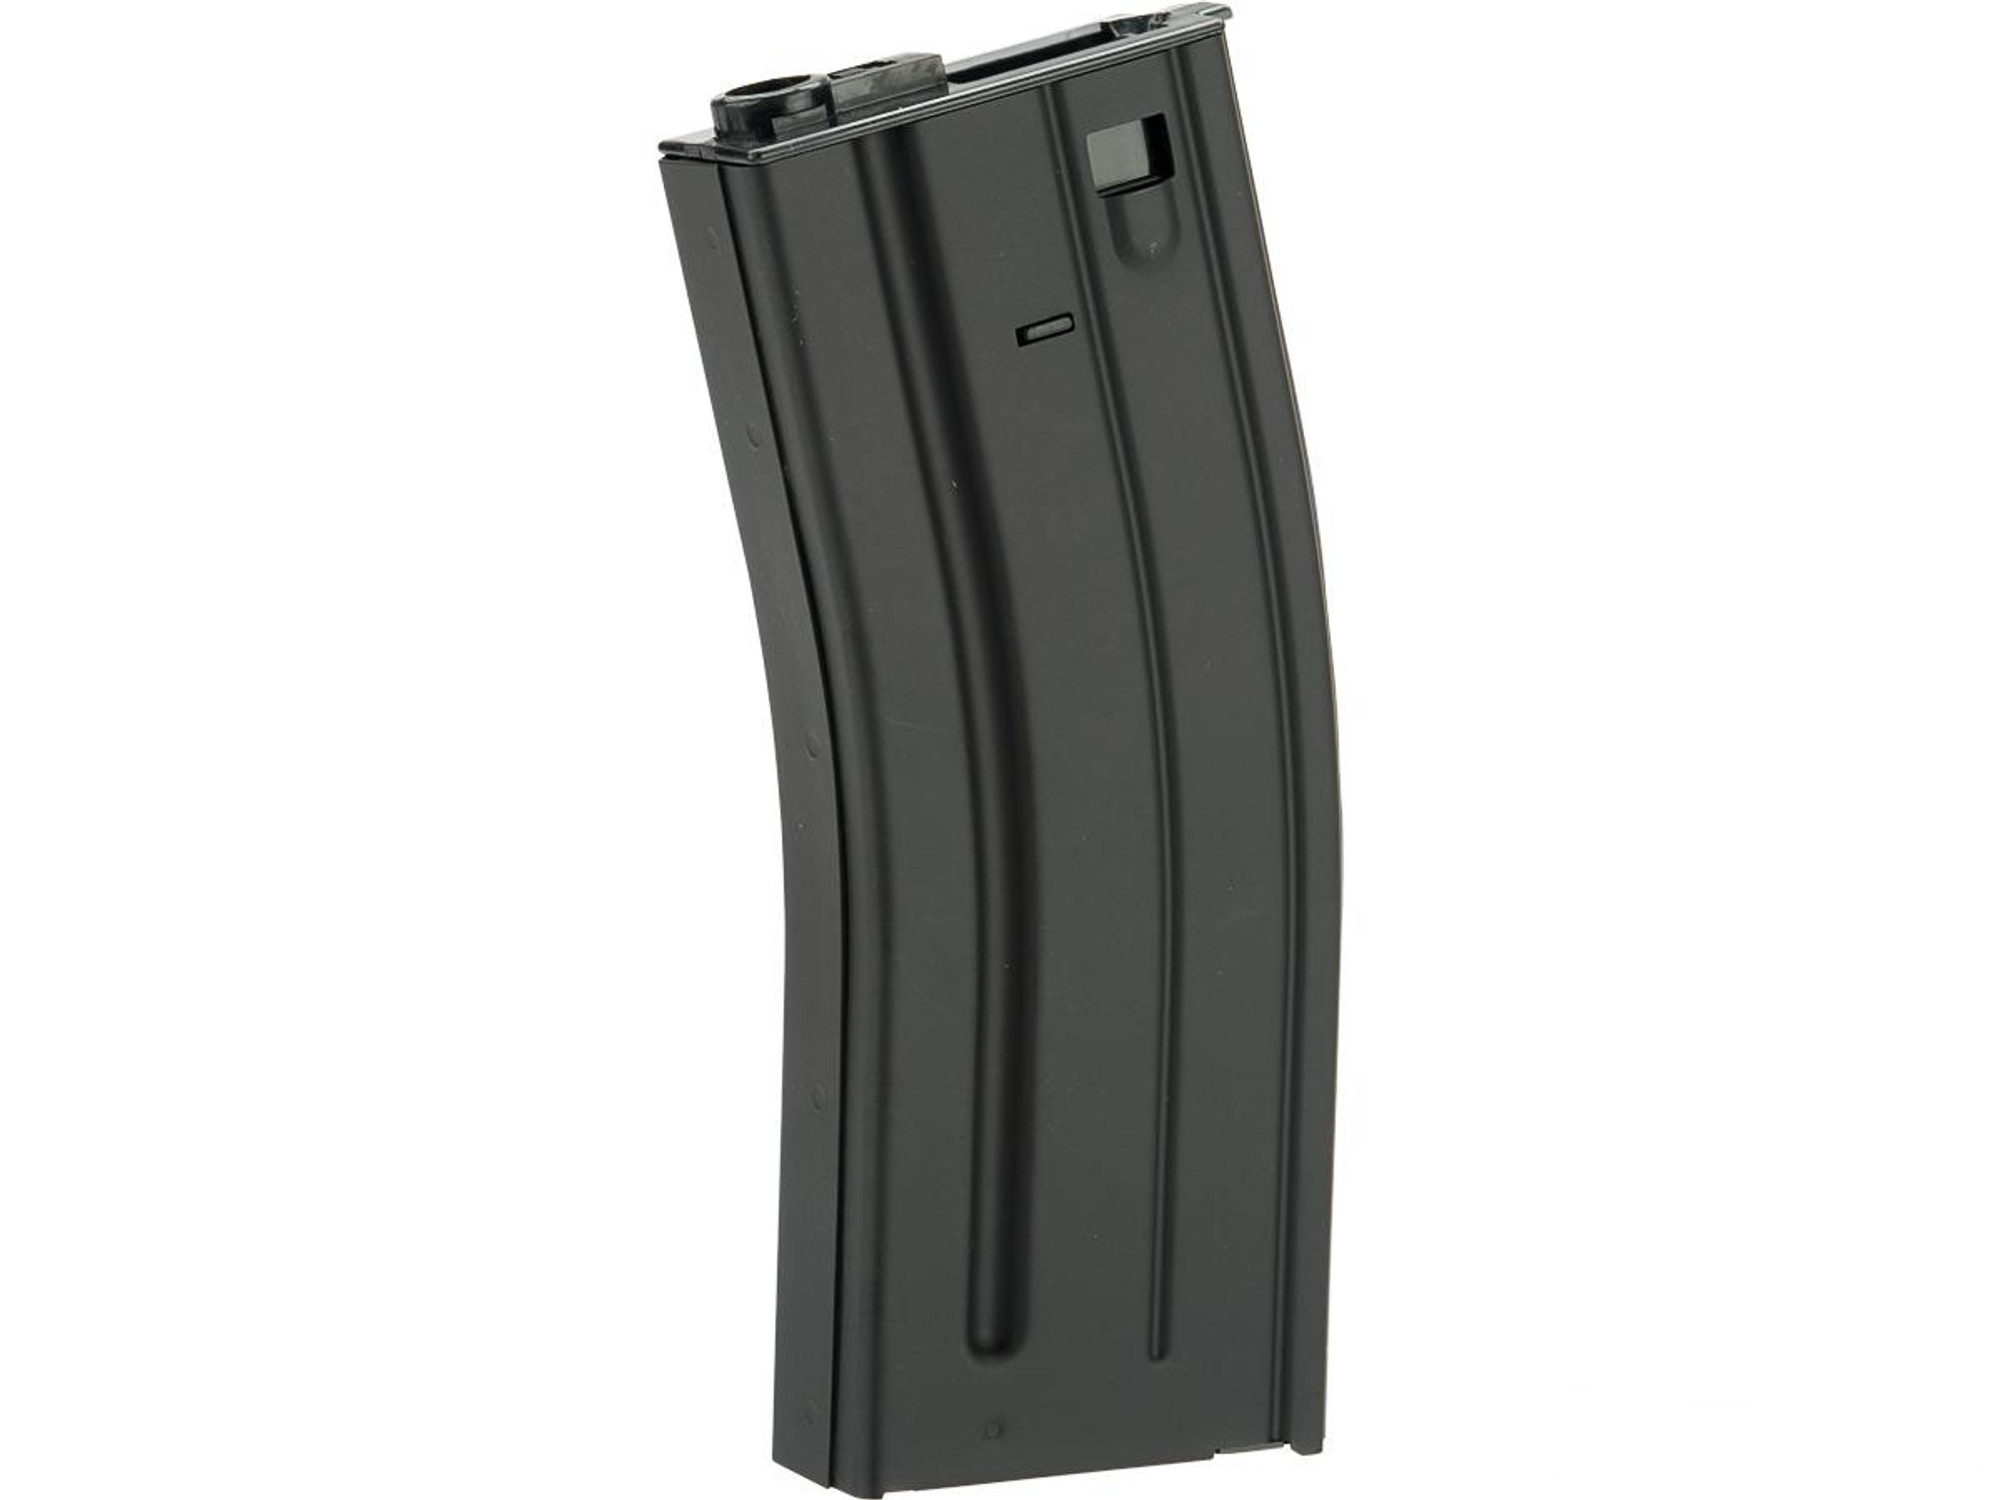 VFC Stamped Steel 300rd High Capacity Magazine for M4 / M16 / SCAR-L Series AEG Rifles (Color: Black)